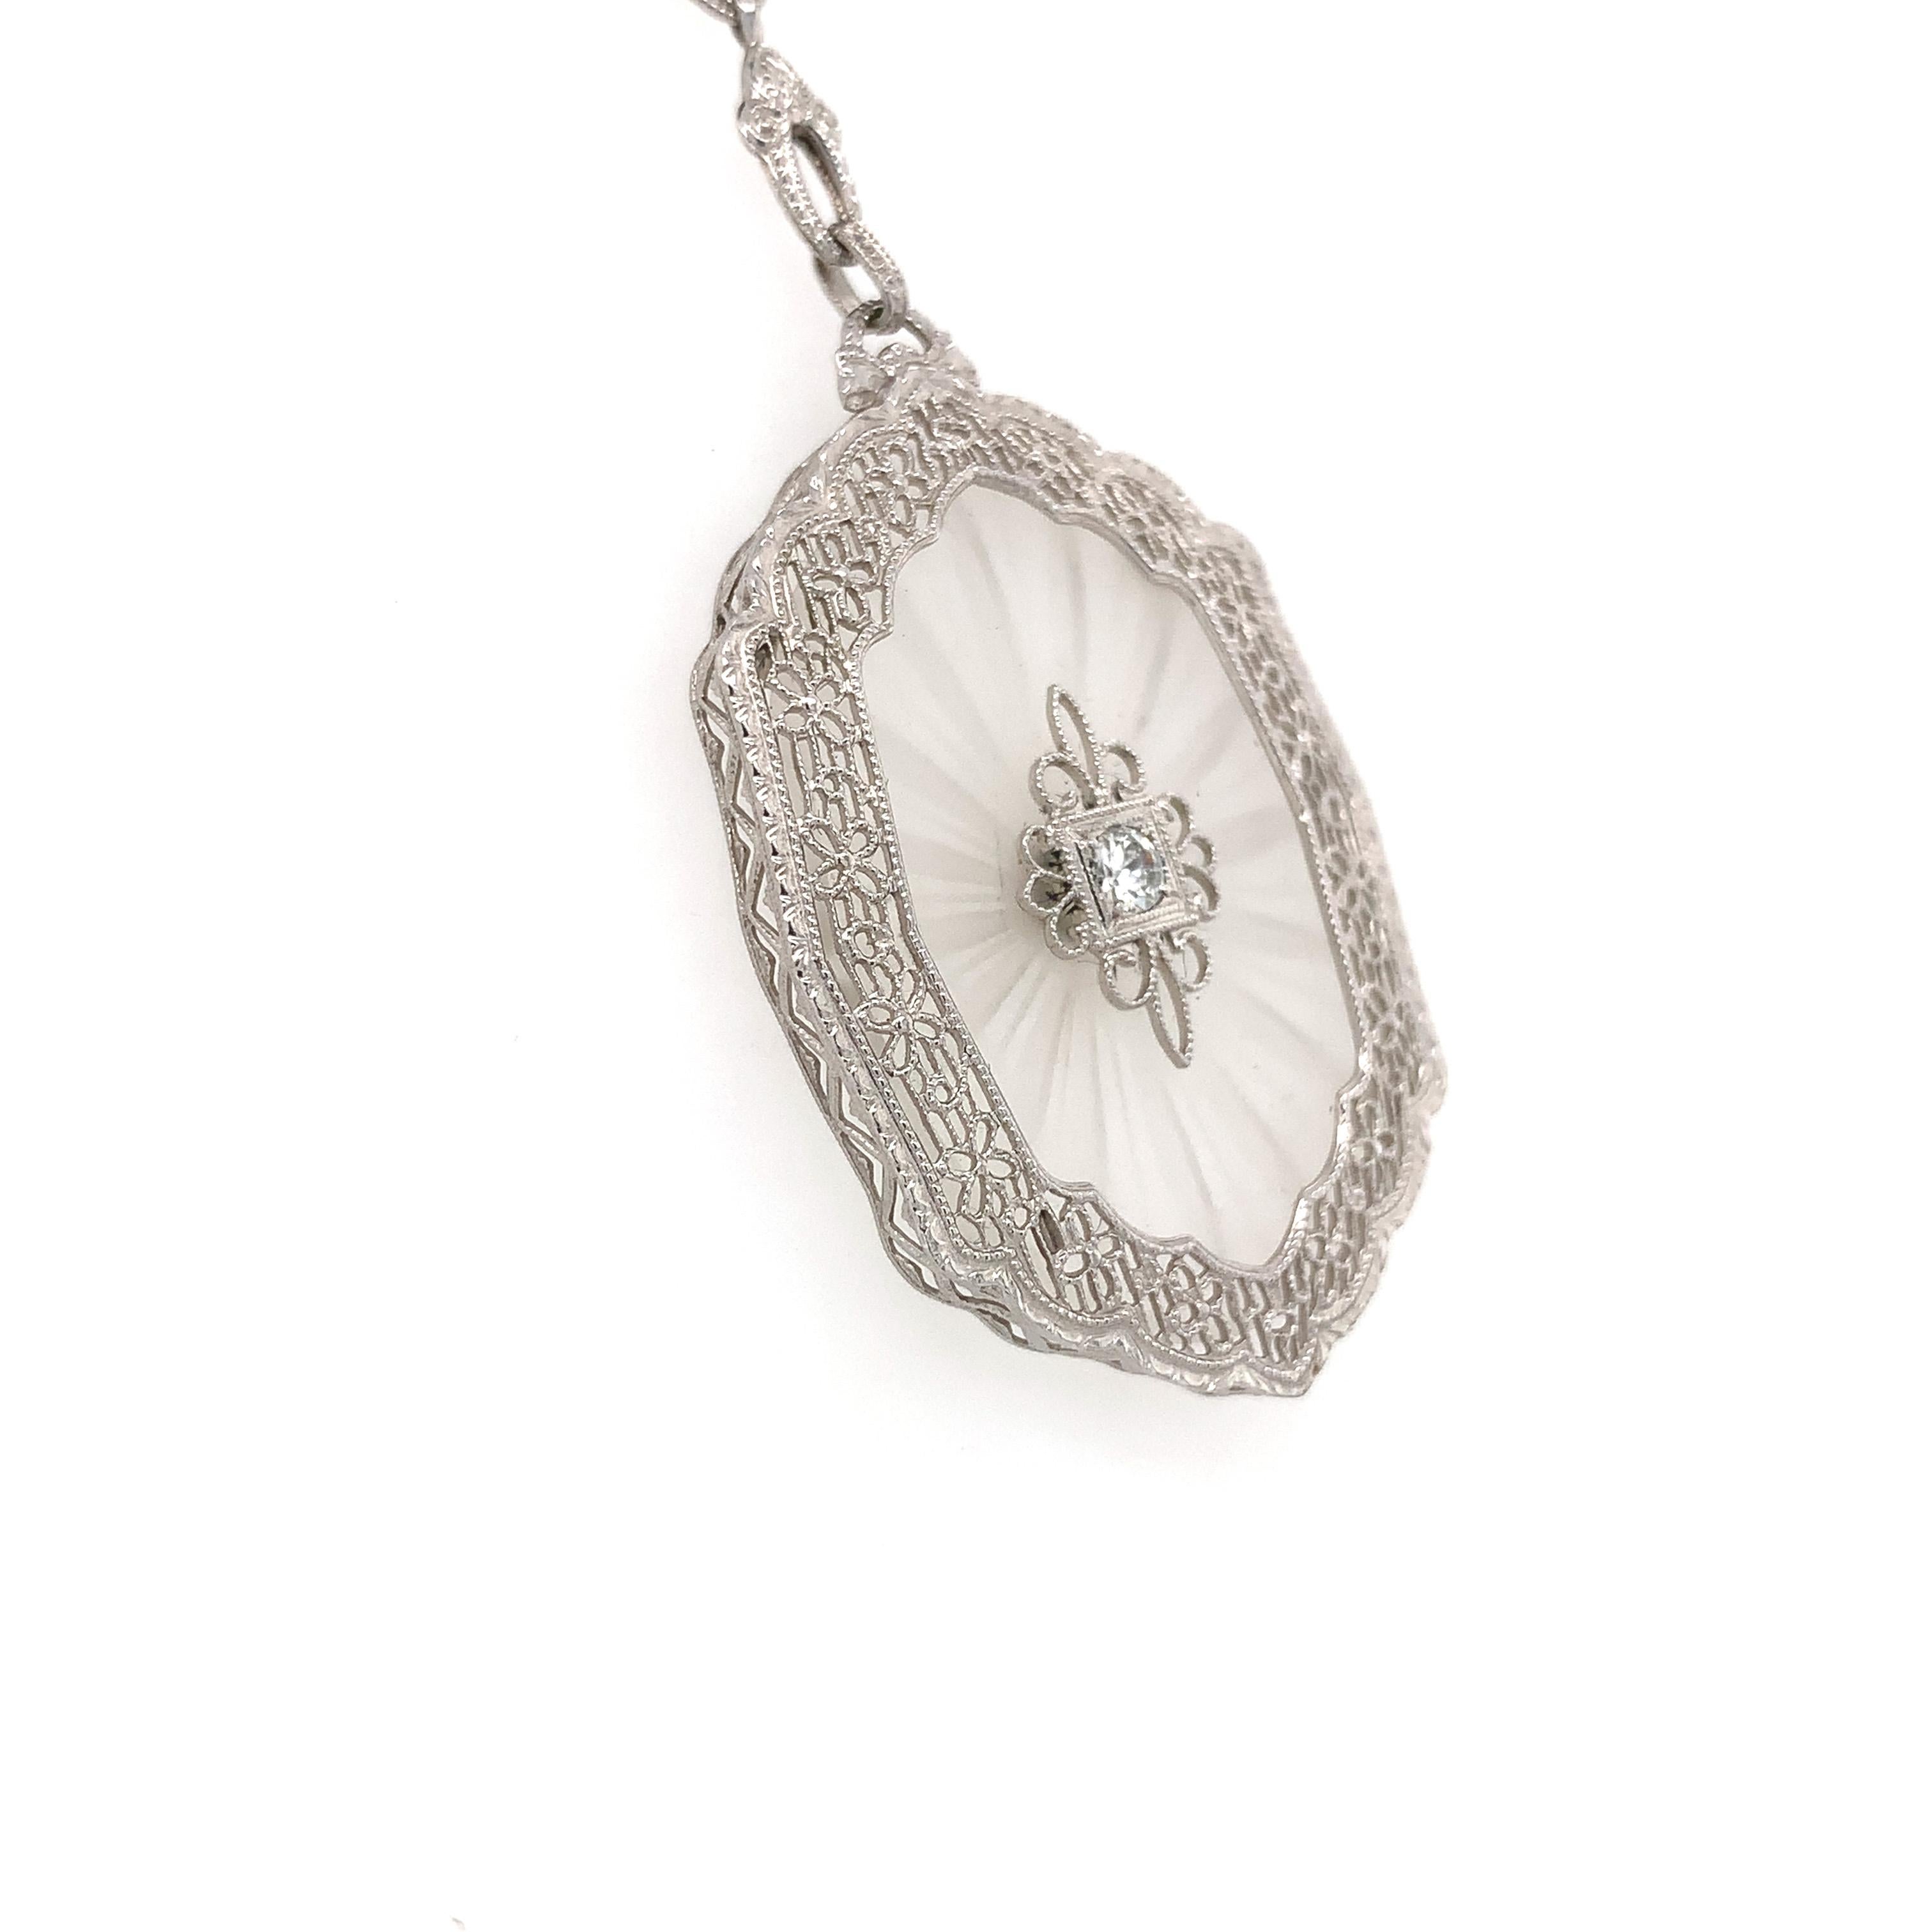 Art Deco 14K white gold necklace featuring a large beautiful frosted and reverse carved rock crystal quartz panel. The large oval crystal measures about 30mm x 22mm, and is accented with a small round diamond measuring about 2.5mm. There is a wide